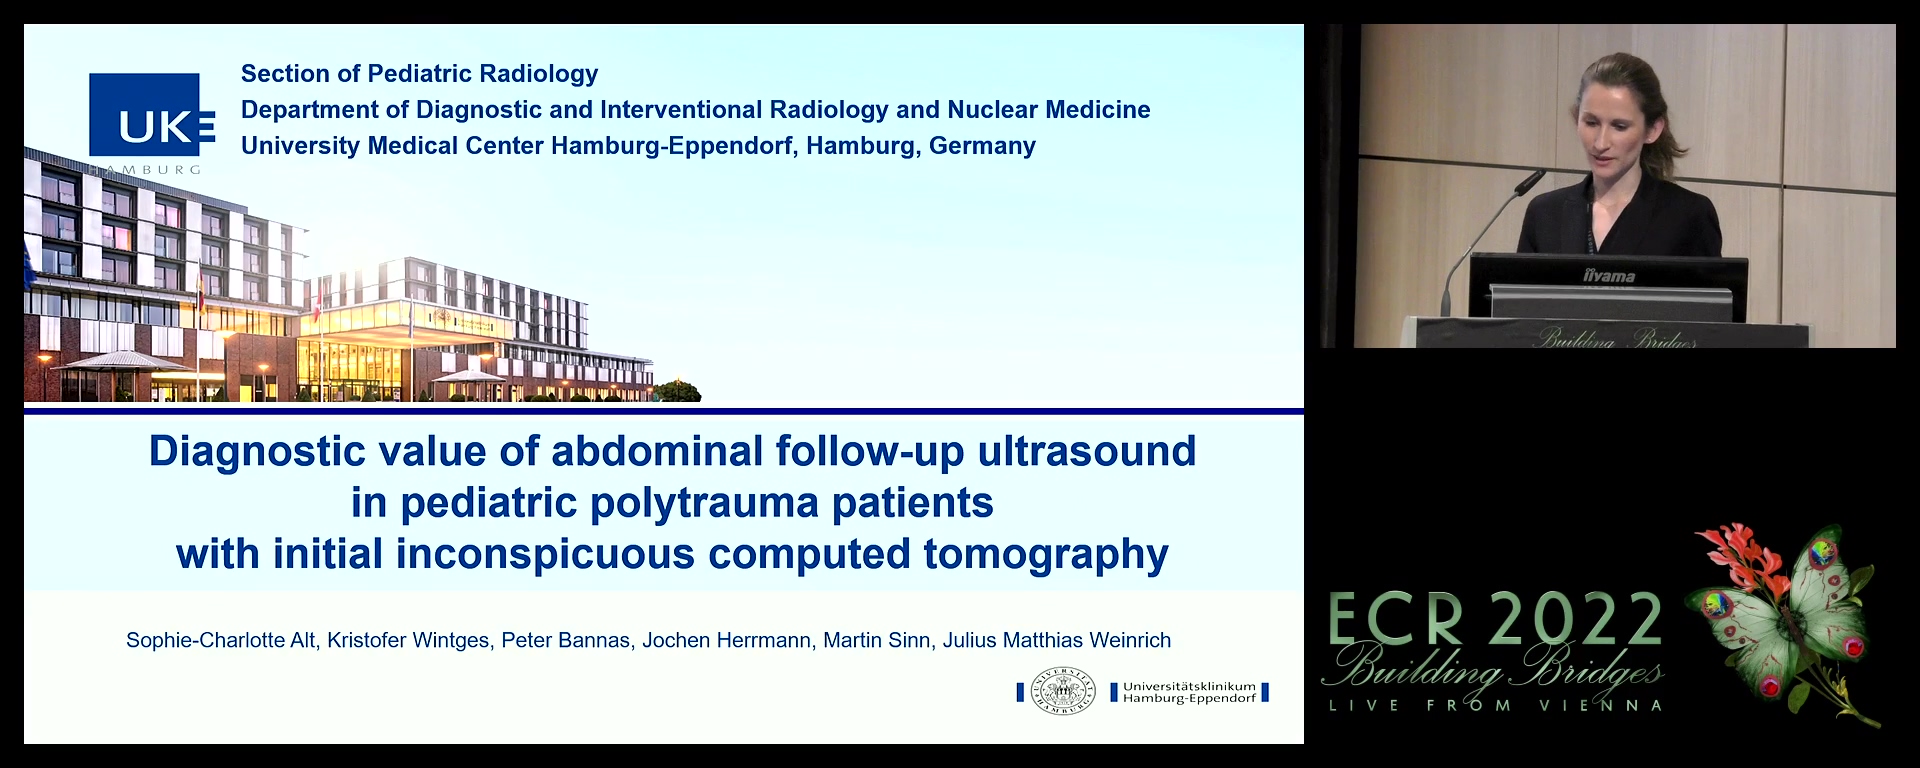 Diagnostic value of abdominal follow-up sonography in paediatric polytrauma patients with inconspicuous initial computed tomography - Sophie-Charlotte Alt, Hamburg / DE